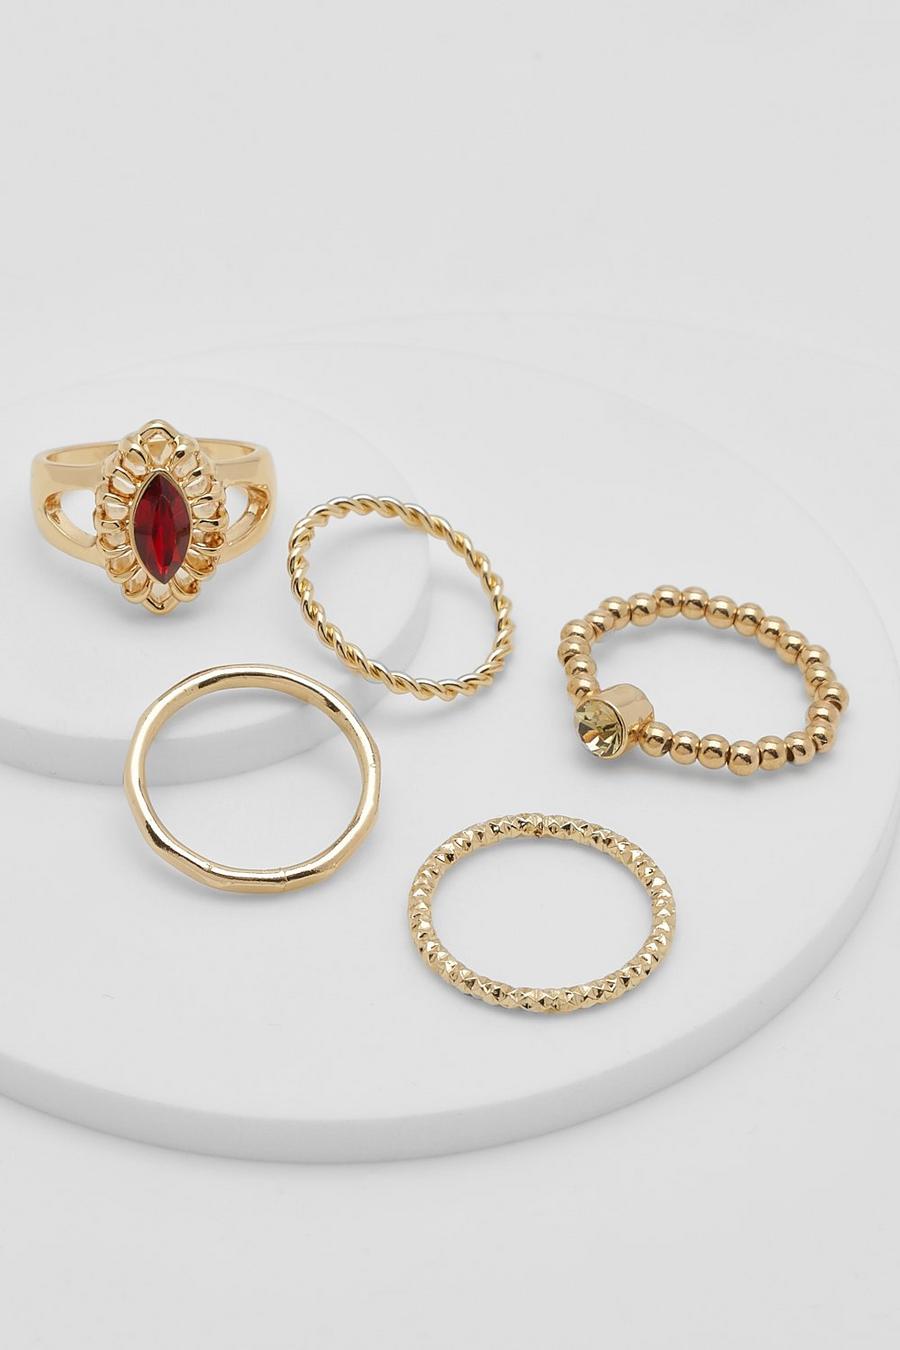 Red Oval Statement Stone Stacking Rings